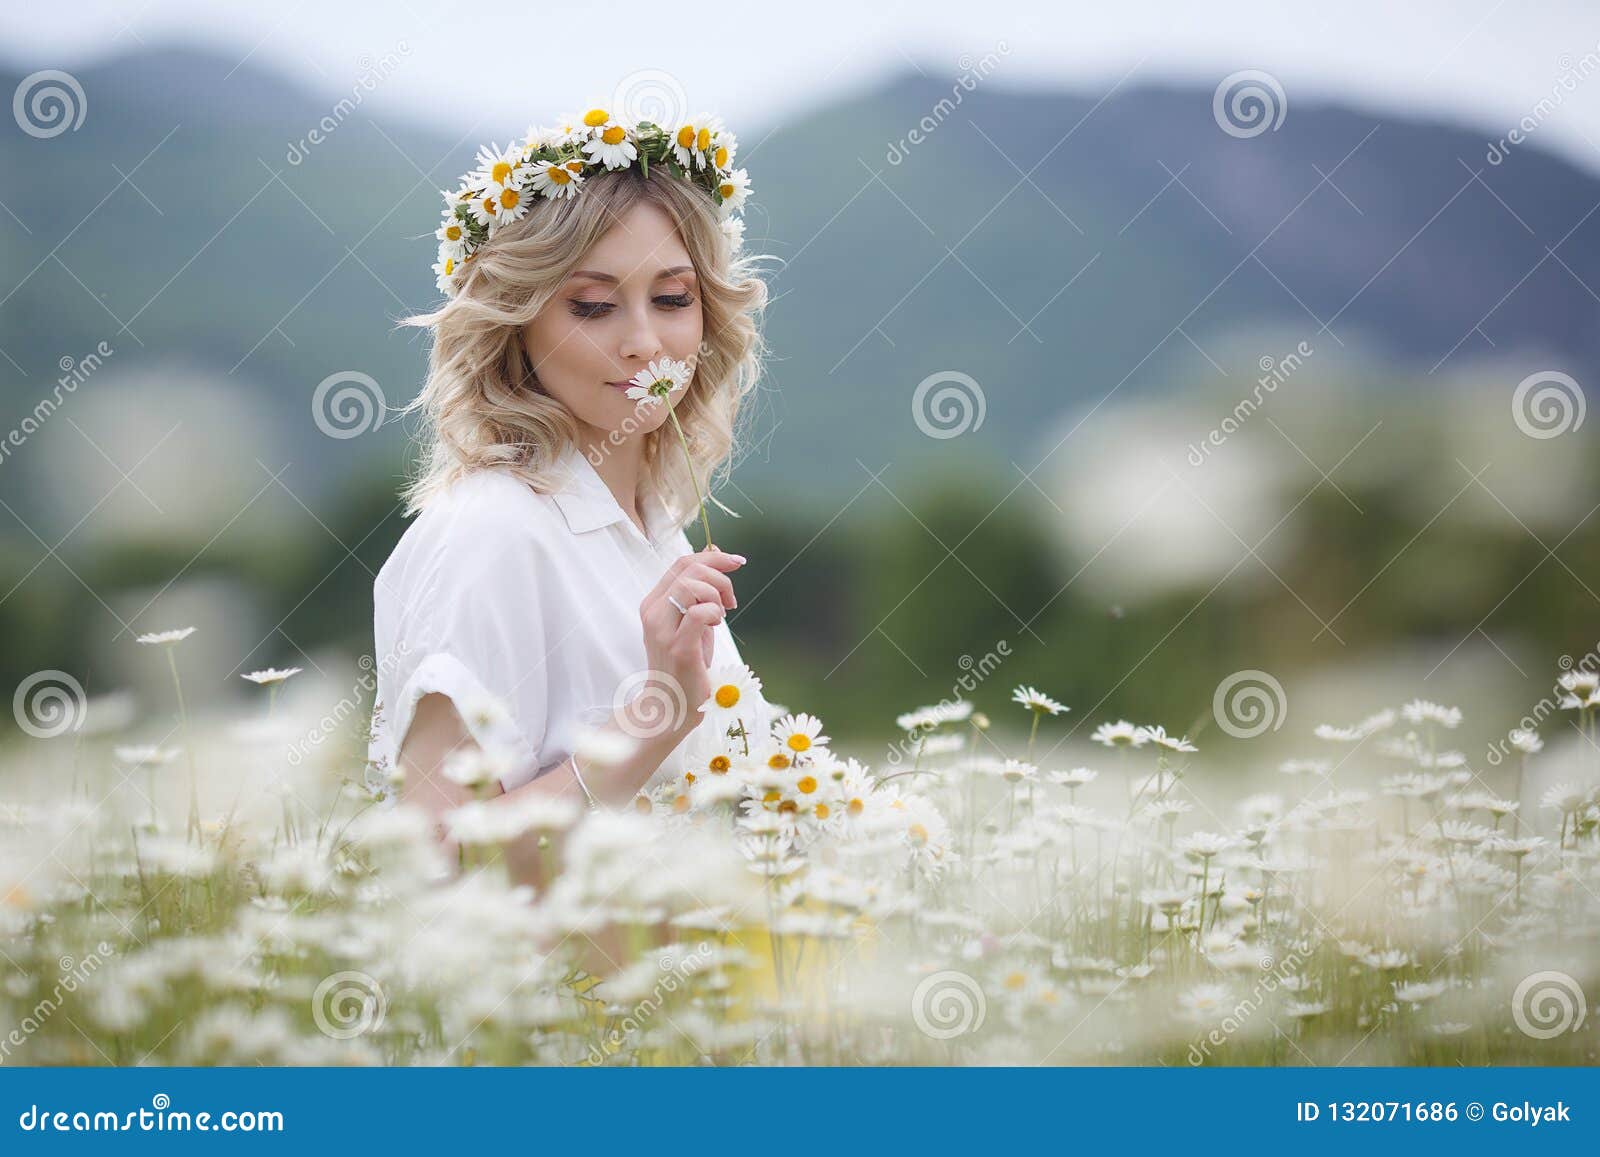 Beautiful Woman Outdoors with a Bouquet of White Daisies on a Blooming ...